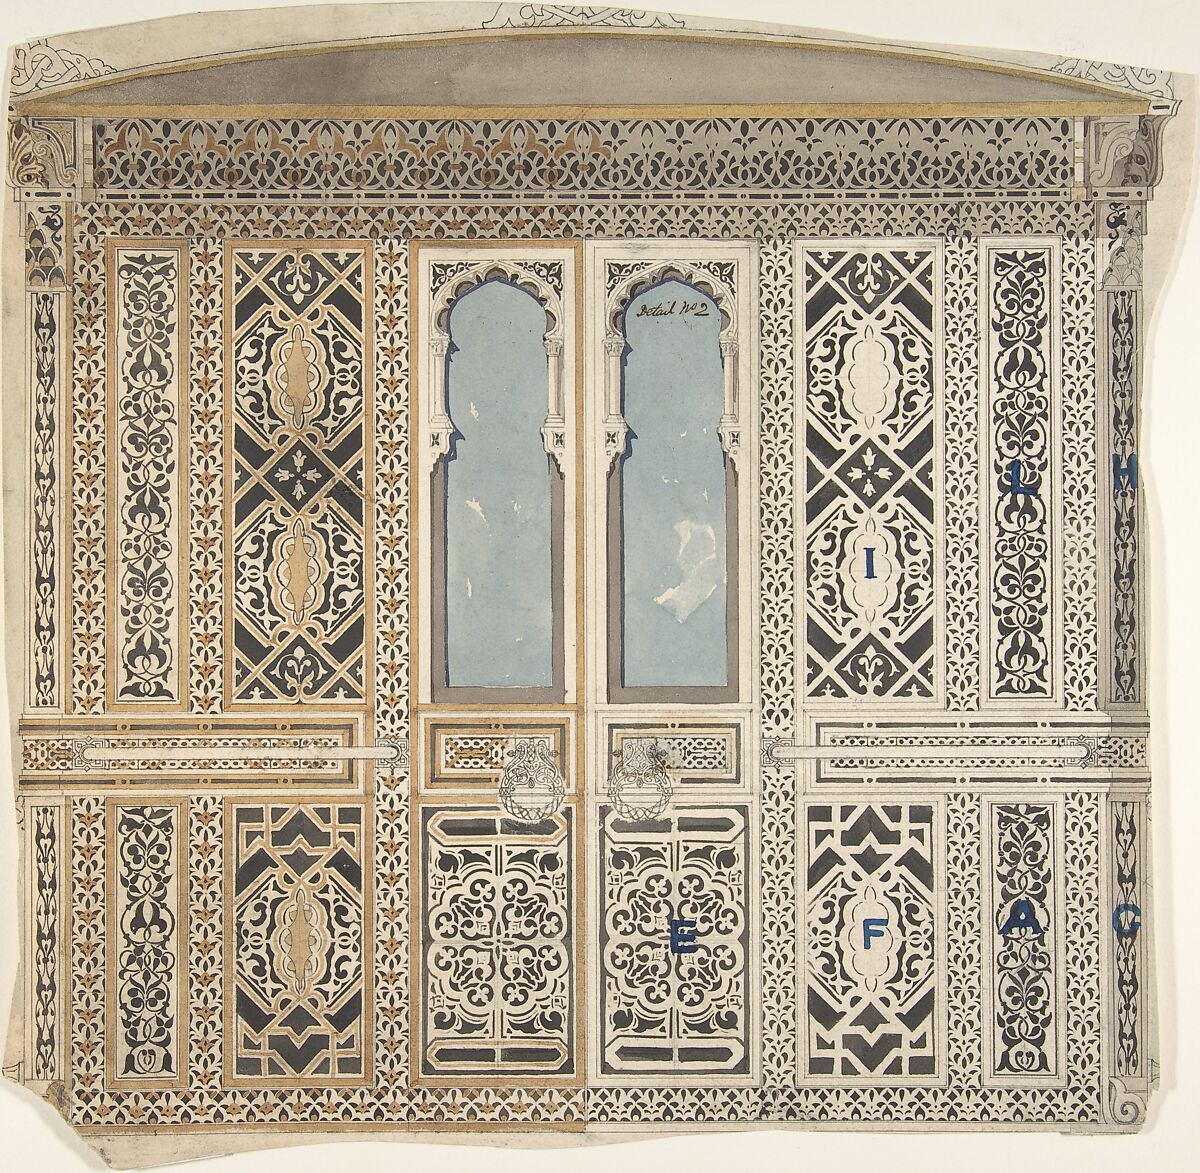 Moorish Wall Elevation, Anonymous, British, 19th century, Pen and ink, brush and wash, watercolor 